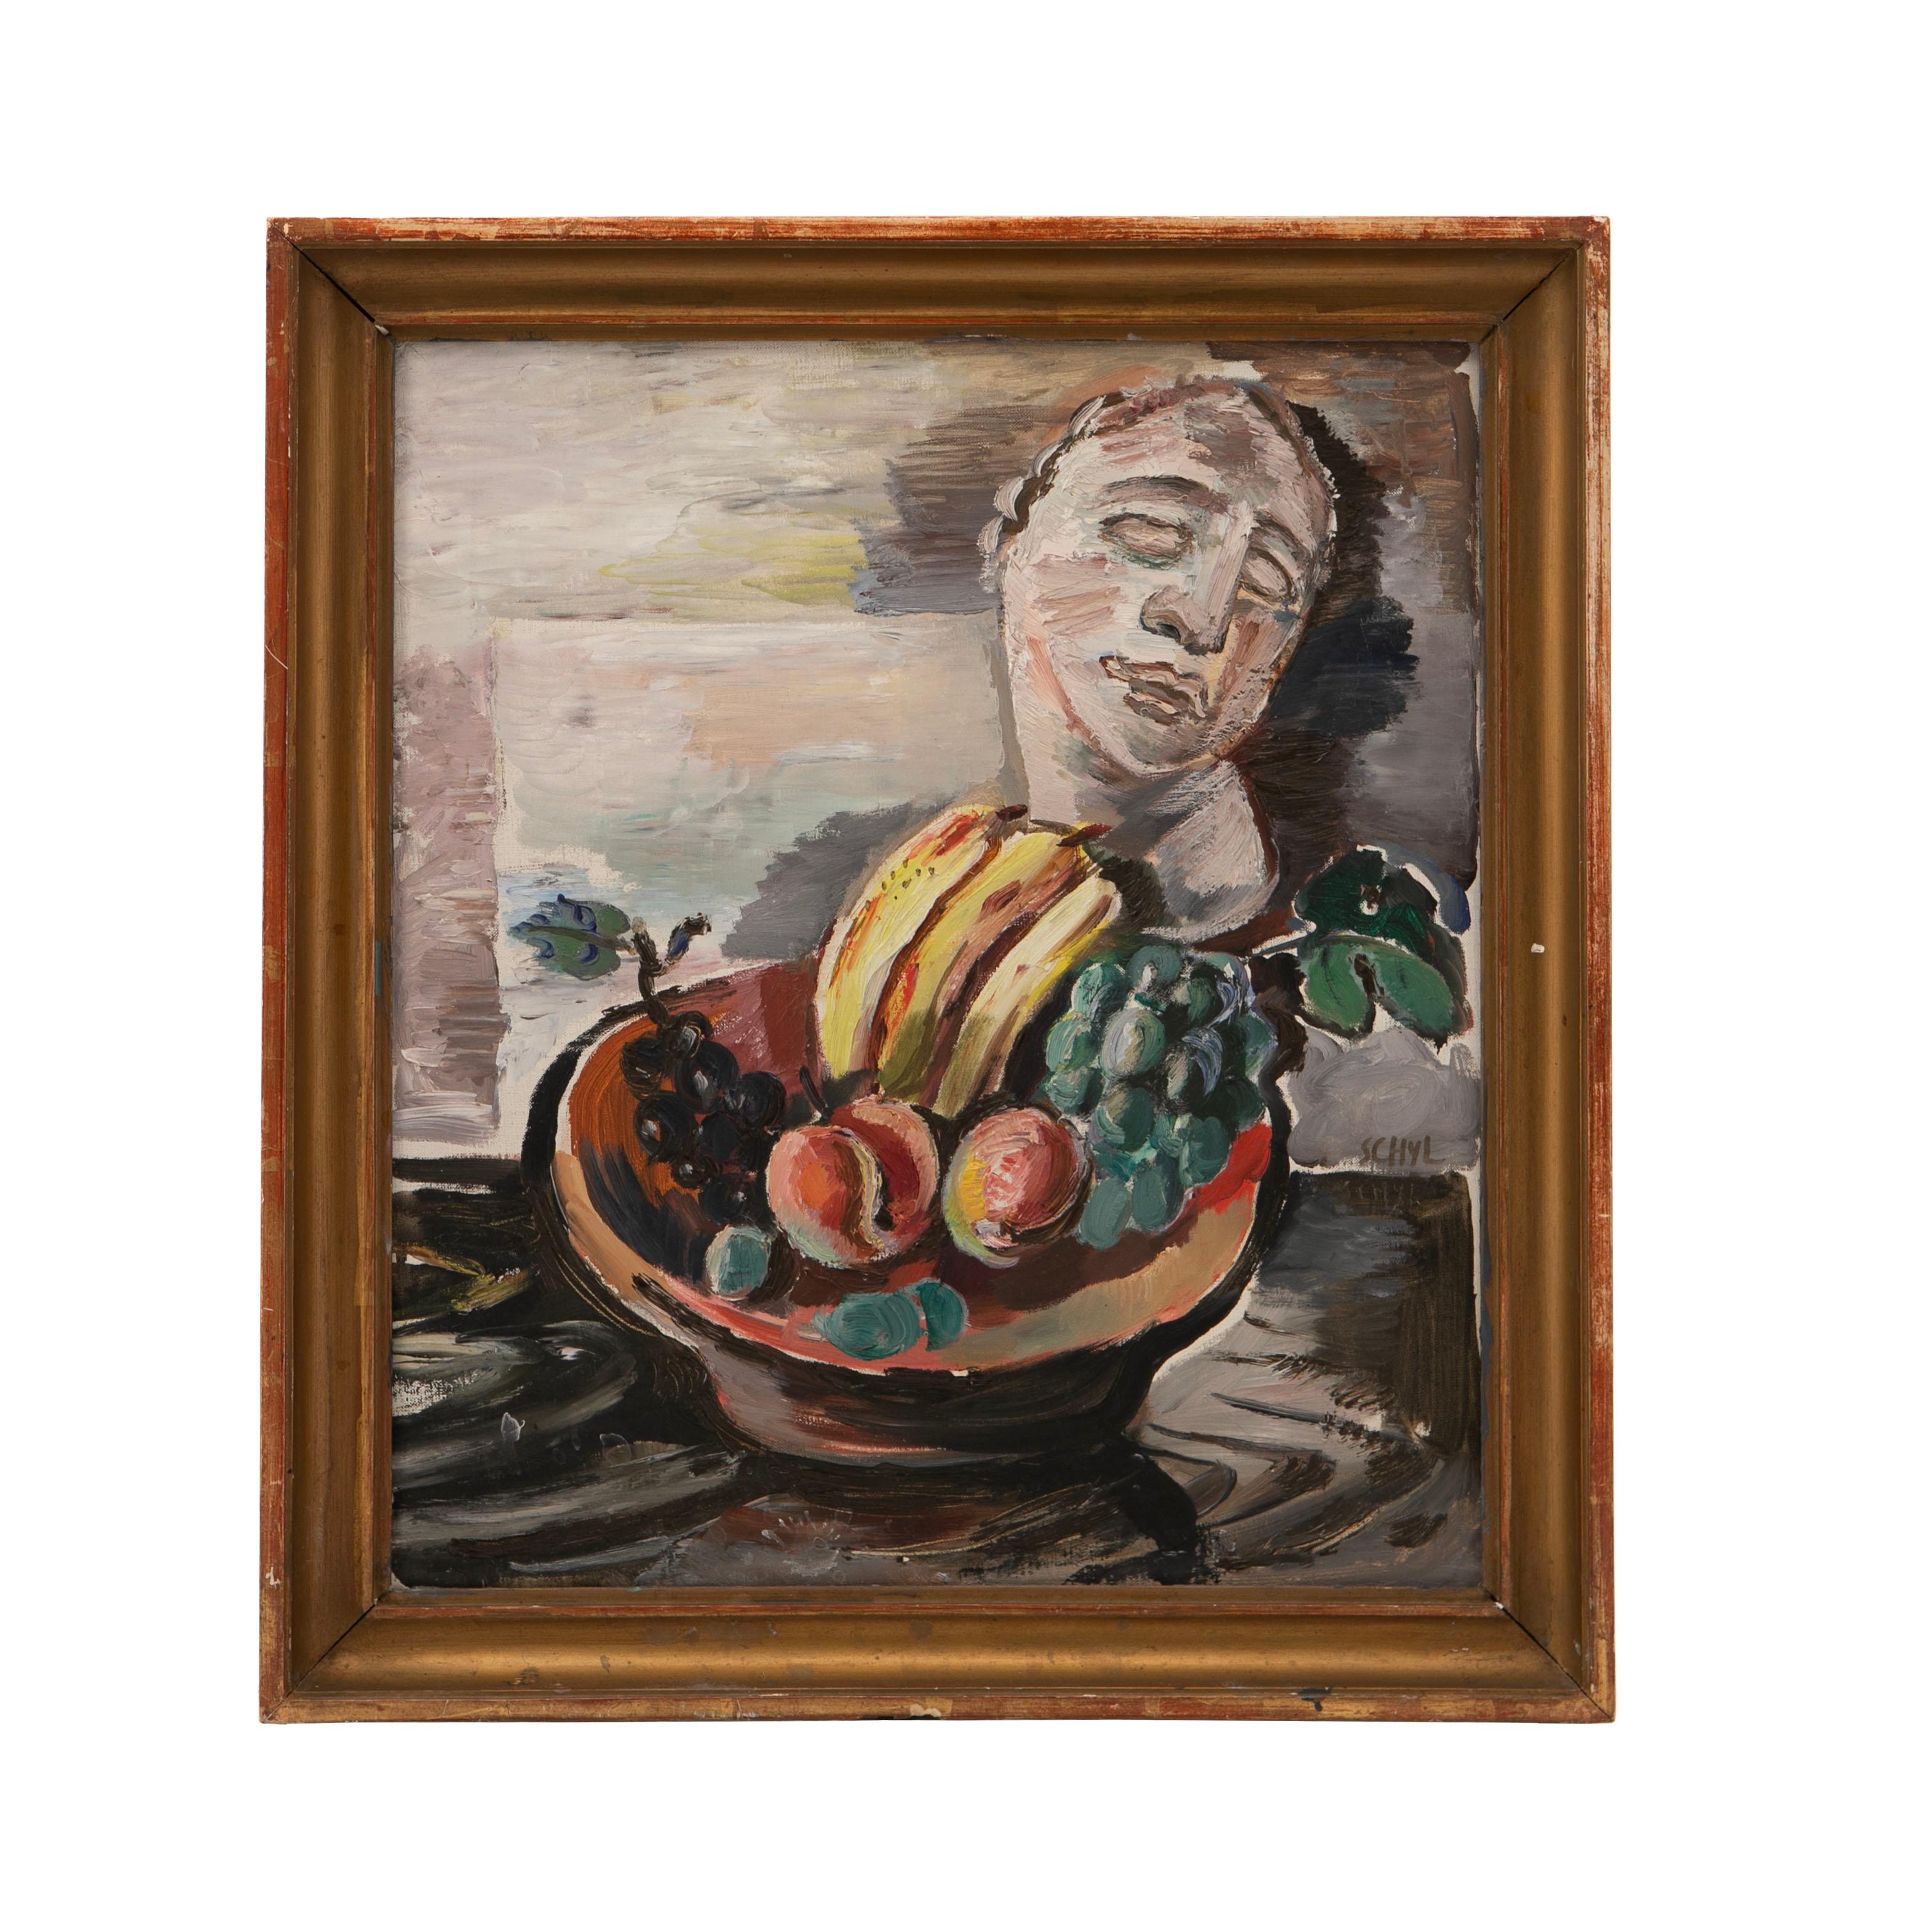 Jules Schyl (Swedish 1893-1977)

Painting. Arrangement / still life: Fruit bowl and bust head.
Oil on canvas.
Dimensions without frame: 43 x 37 cm.

Signed: Schyl